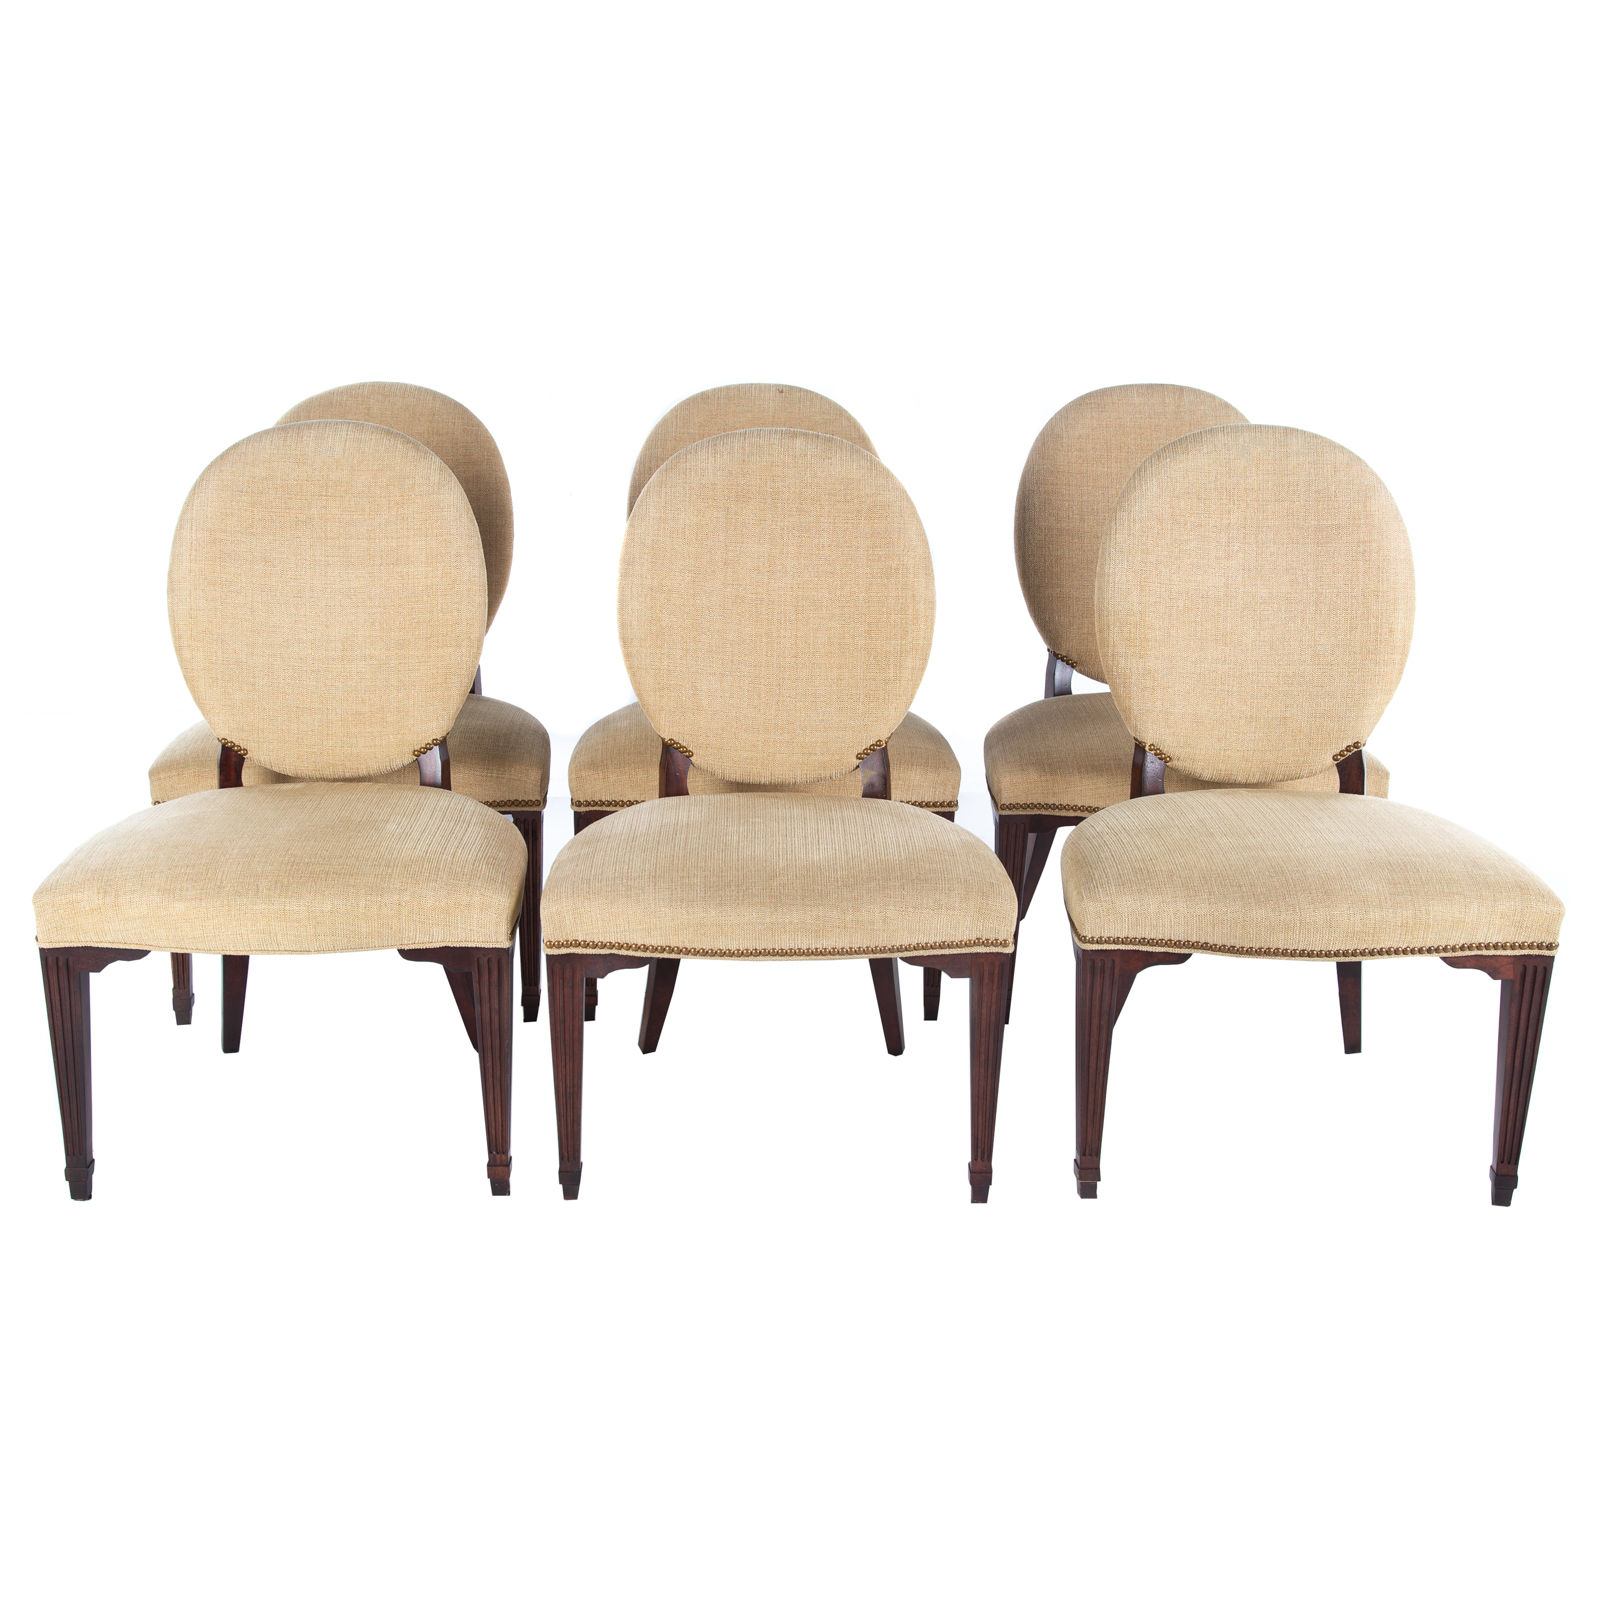 SET OF SIX HICKORY CHAIR UPHOLSTERED